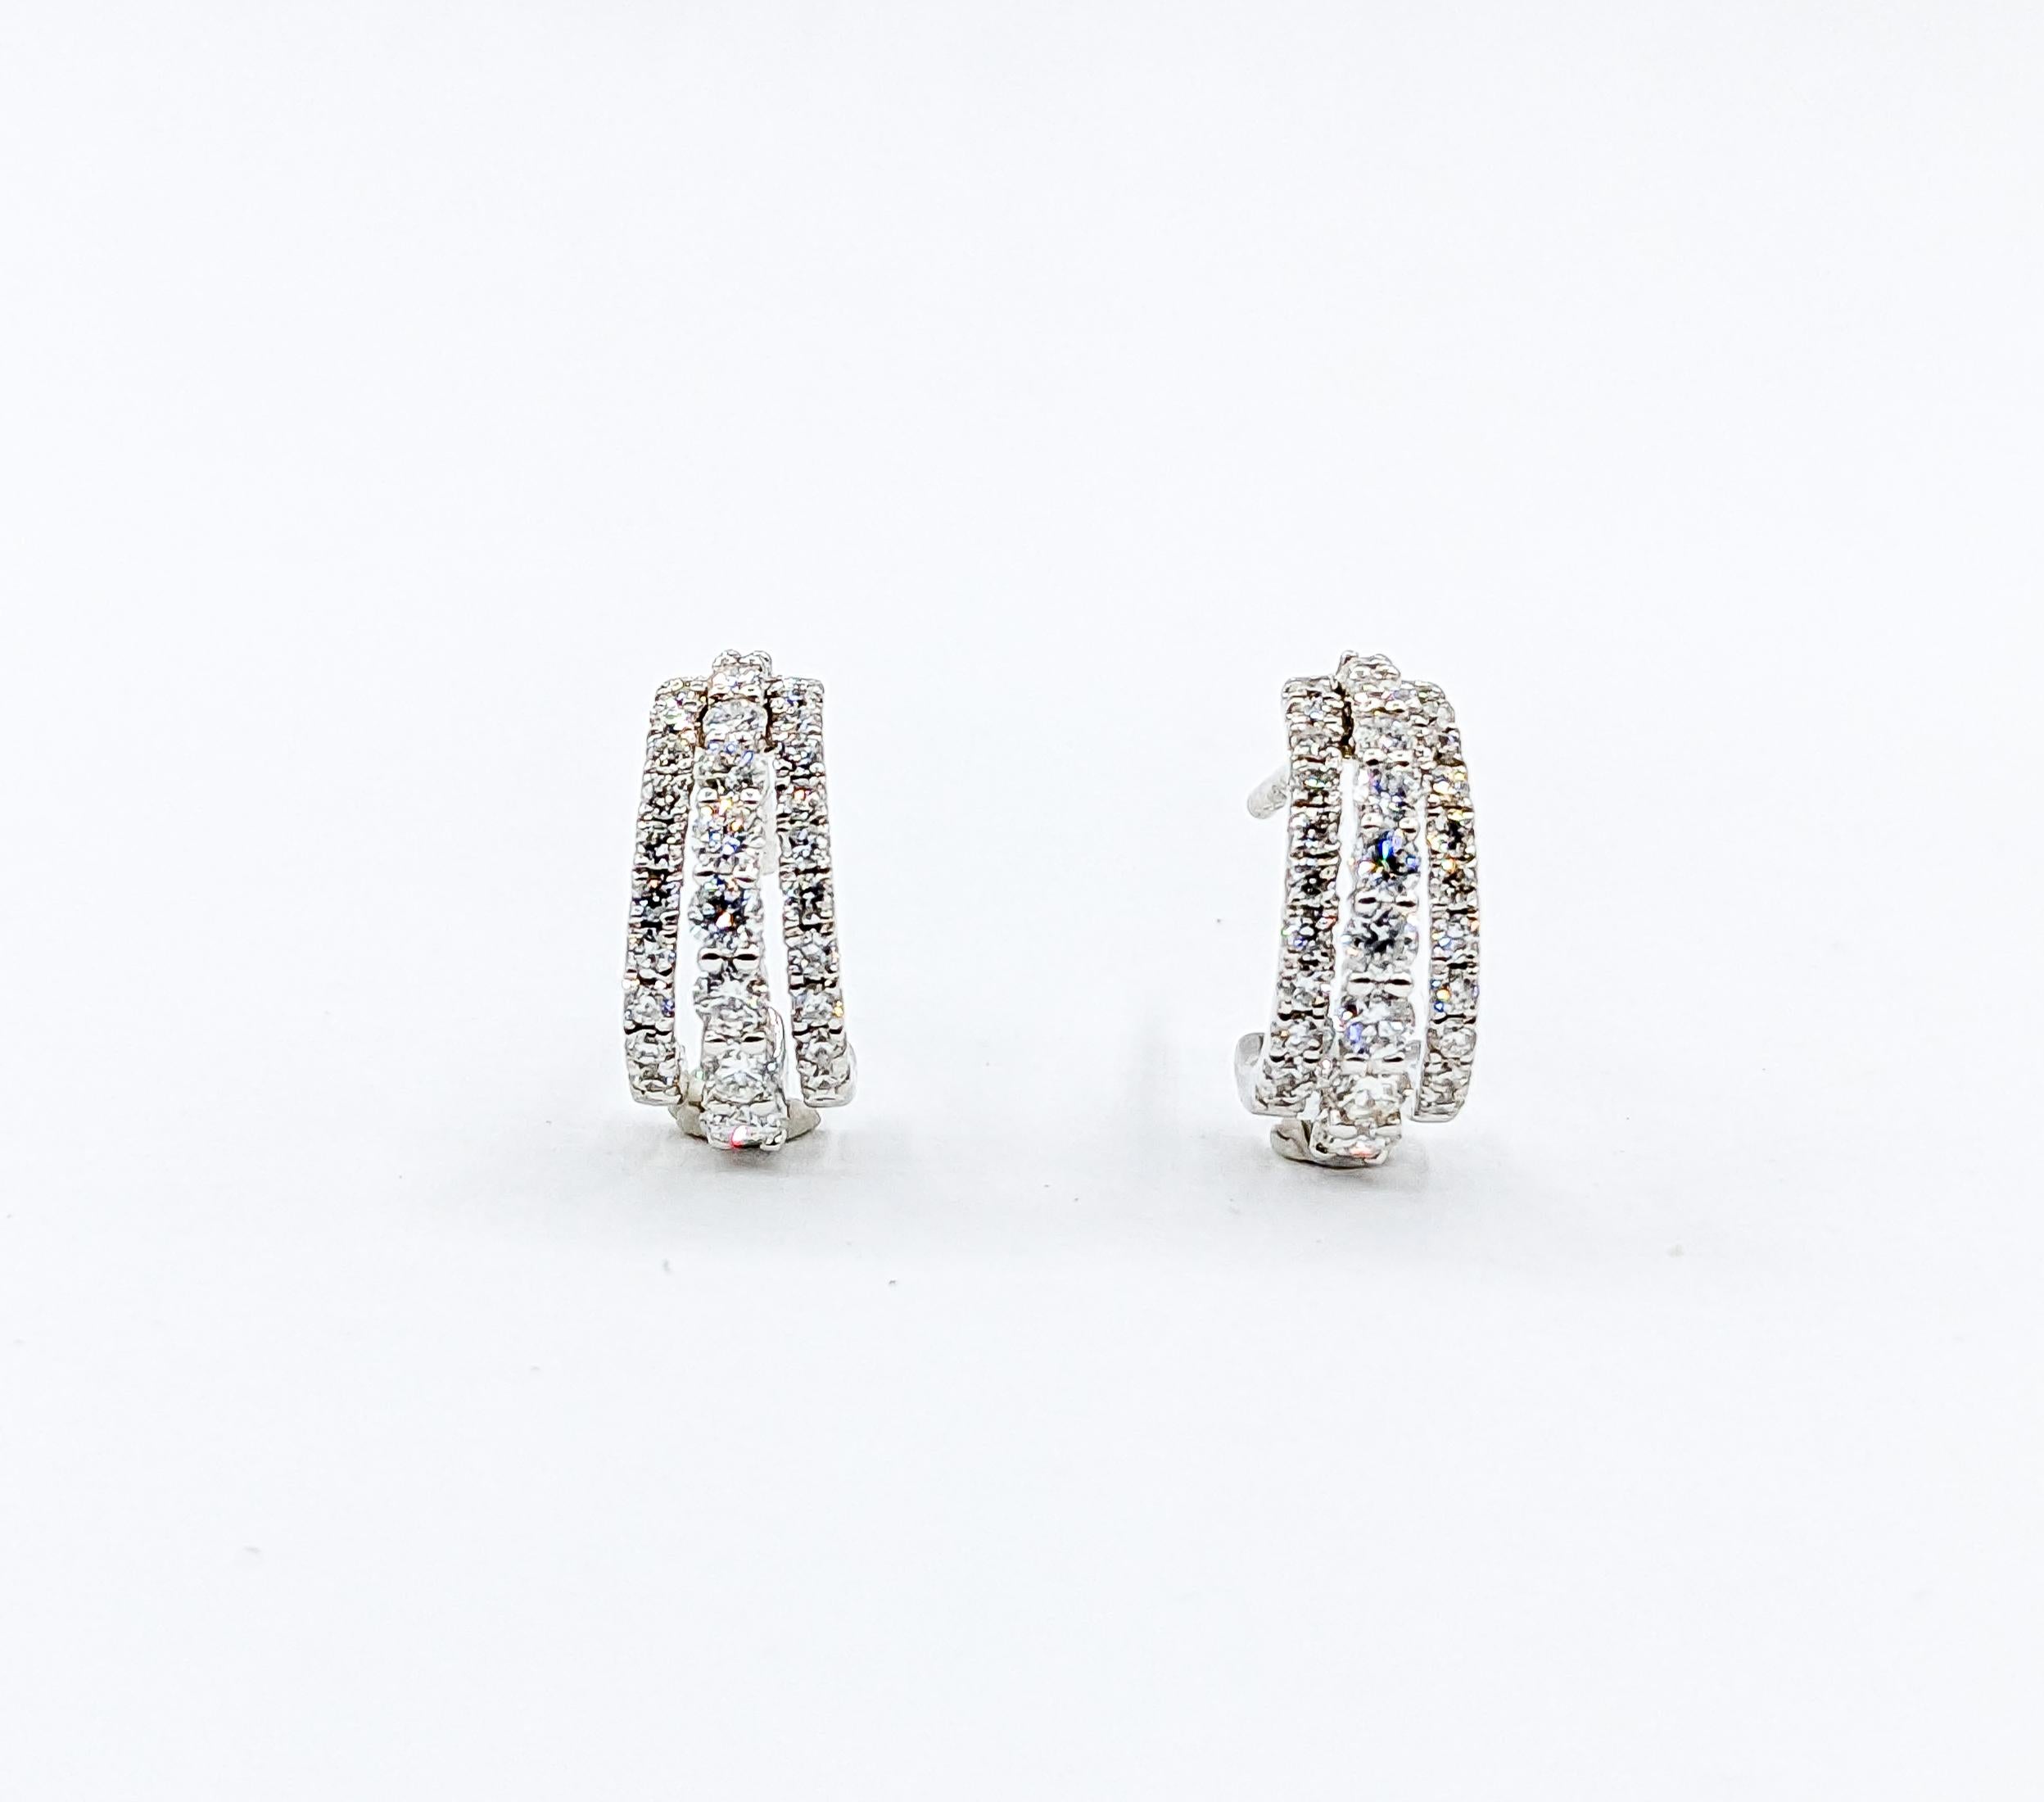 3/4ctw Diamond Sparkling Stud Earrings

Introducing these stunning earrings, a representation of fine craftsmanship and elegance. Fashioned from the coveted 14kw white gold, they emanate a cool, luminous glow that graces any occasion with a touch of